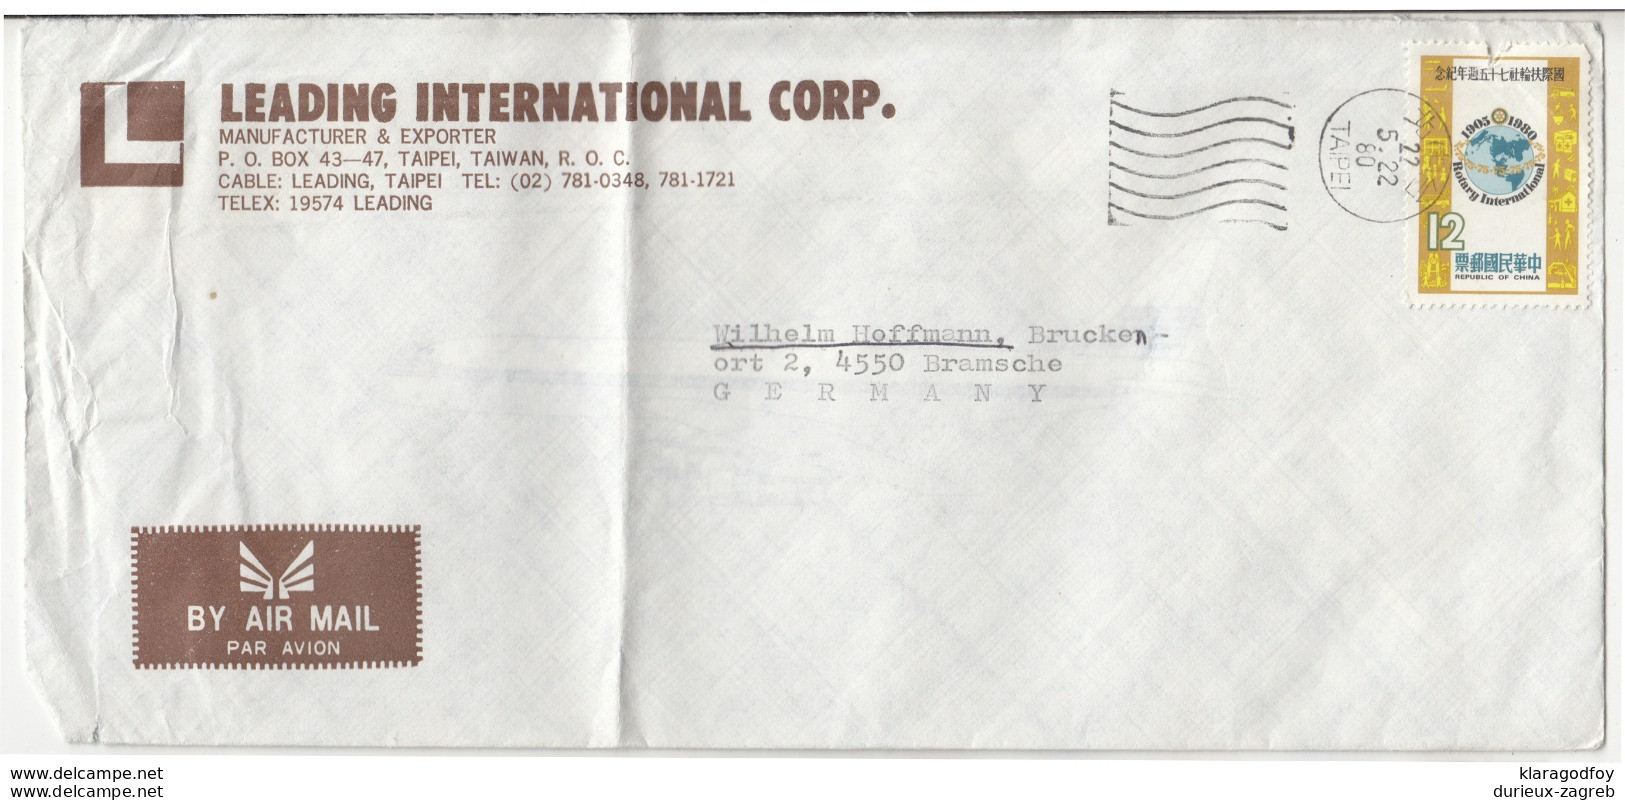 Leading International Taipei Company Air Mail Letter Cover Travelled 1980? To Germany B190922 - Briefe U. Dokumente